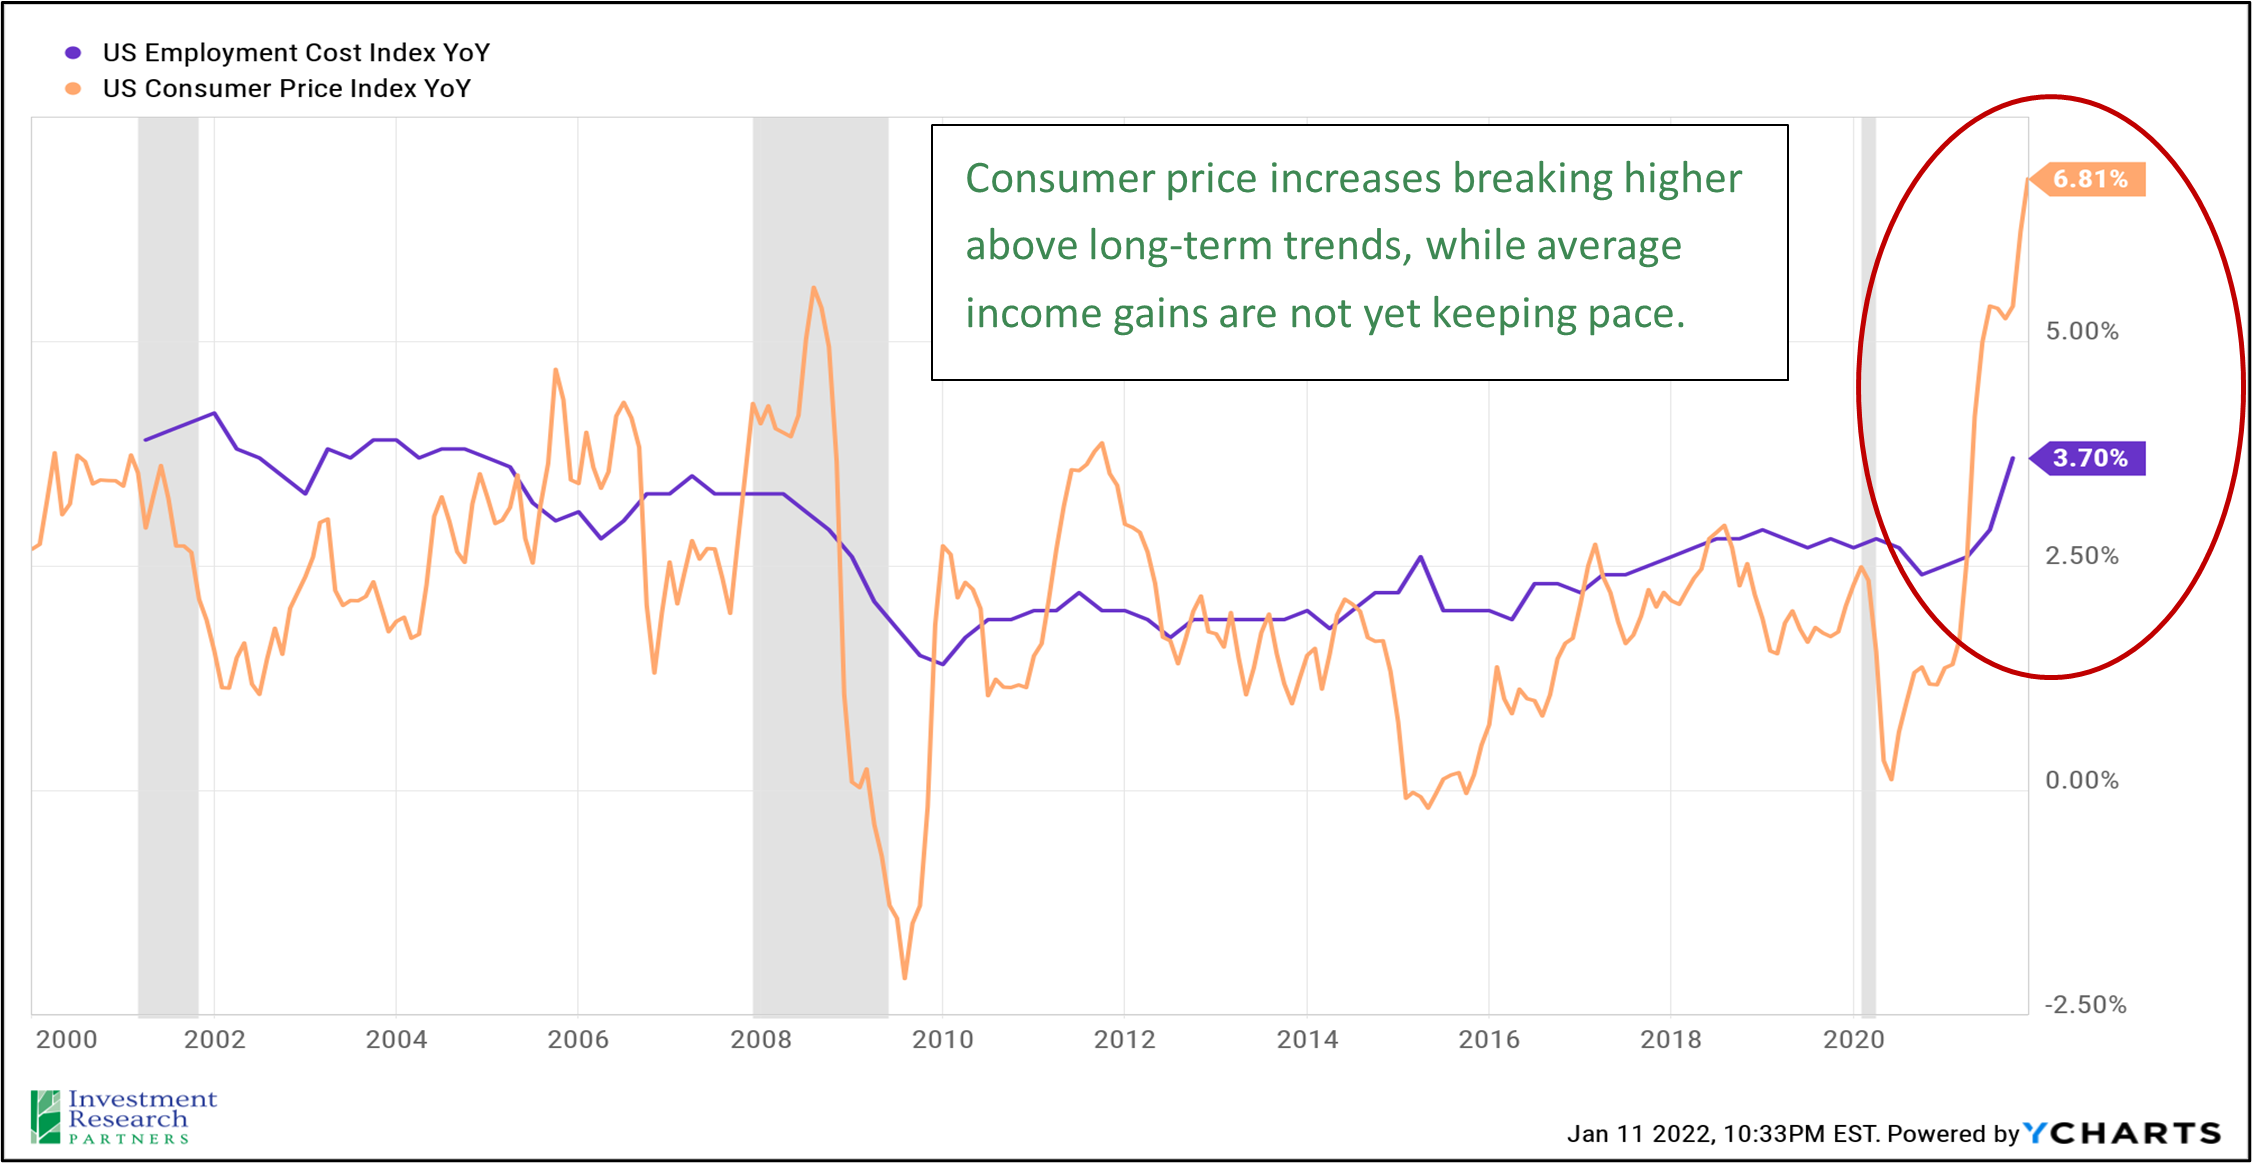 Line graph depicting US Employment Cost Index YoY in purple and US Consumer Price Index YoY in orange since 2000 with text reading: Consumer price increases breaking higher above long-term trends, while average income gains are not yet keeping pace.